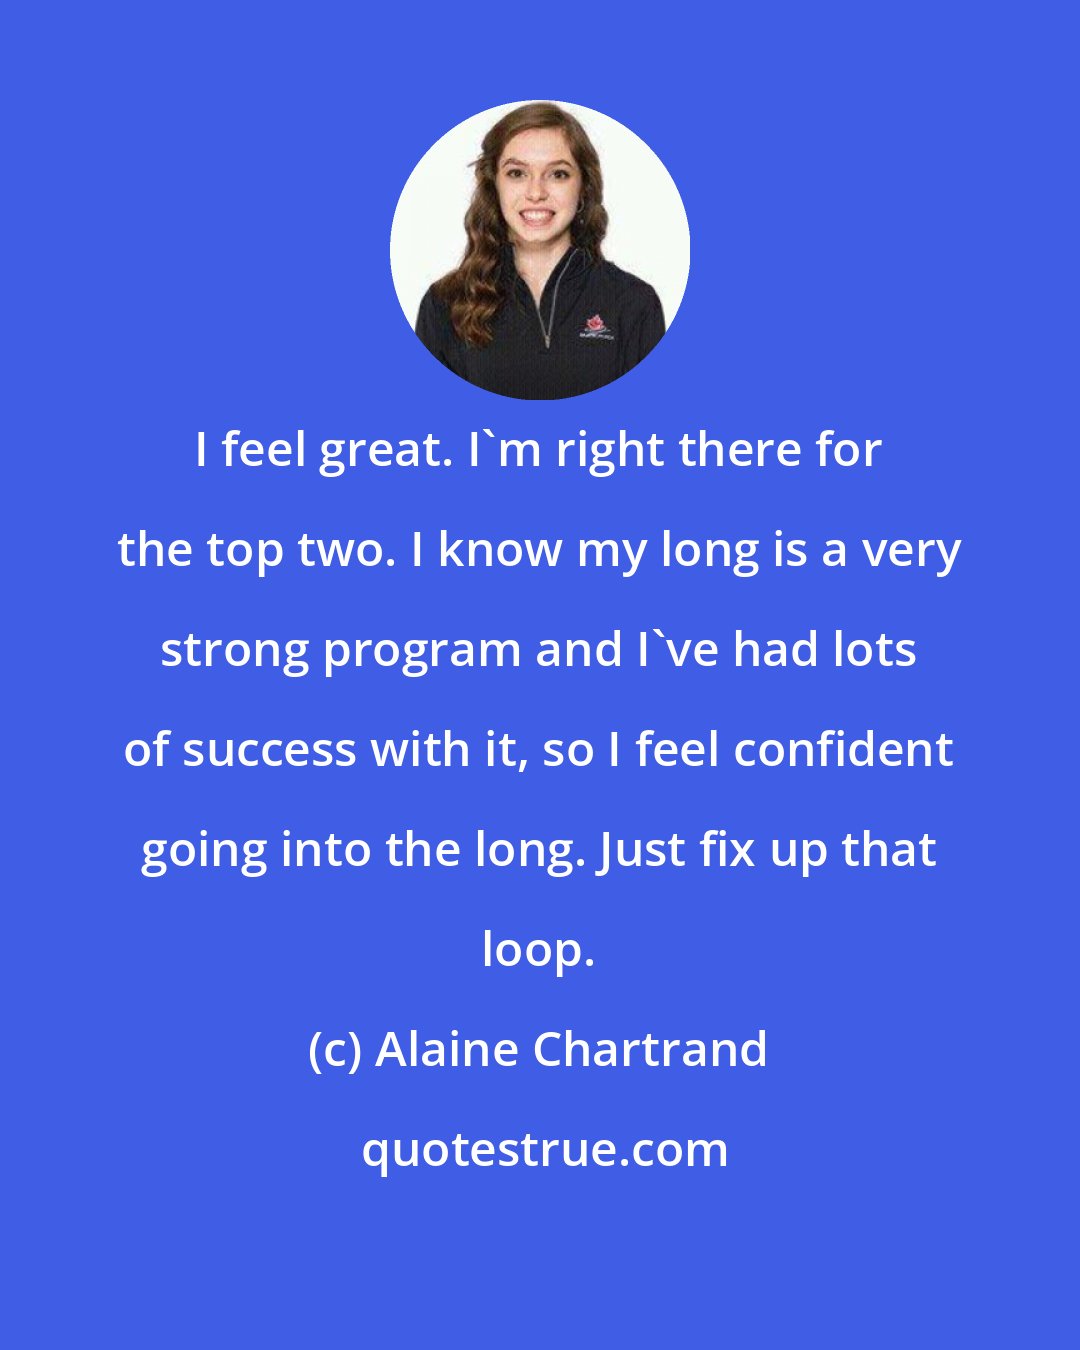 Alaine Chartrand: I feel great. I'm right there for the top two. I know my long is a very strong program and I've had lots of success with it, so I feel confident going into the long. Just fix up that loop.